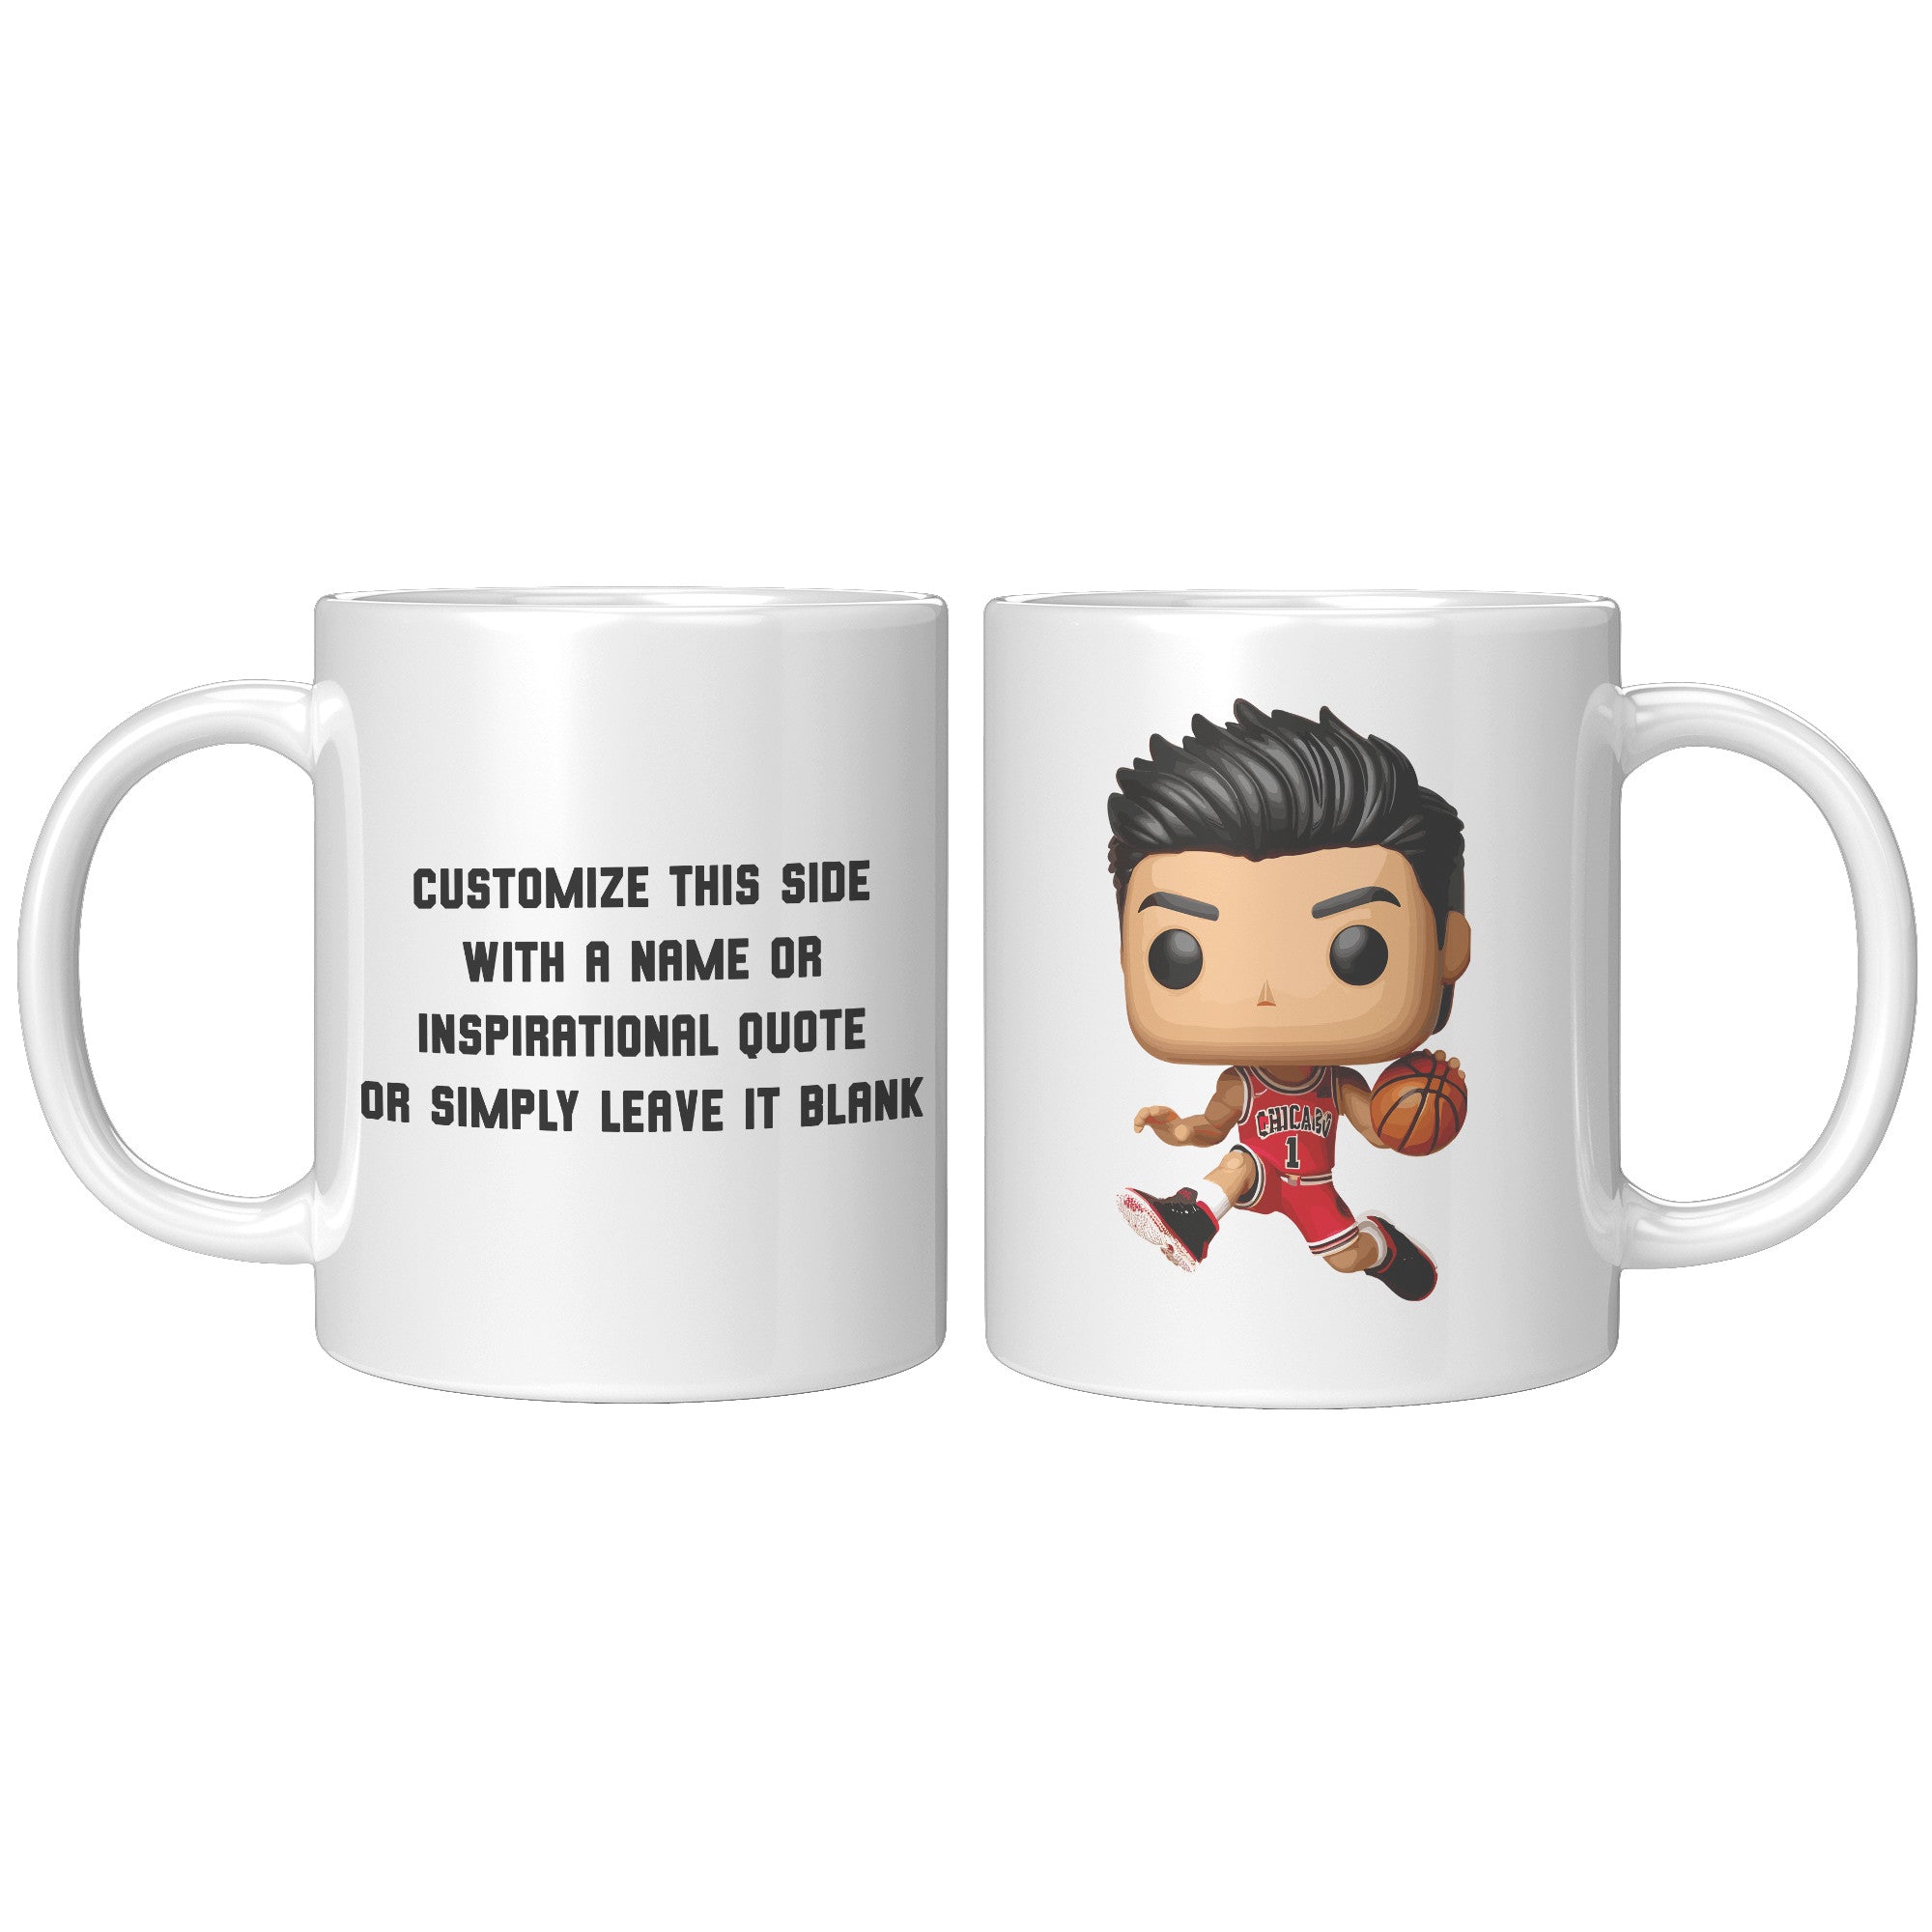 "Slam Dunk Basketball Coffee Mug - Hoops Enthusiast Cup- Perfect Gift for Basketball Players & Fans - Court-Ready Style Coffee Mug" - H